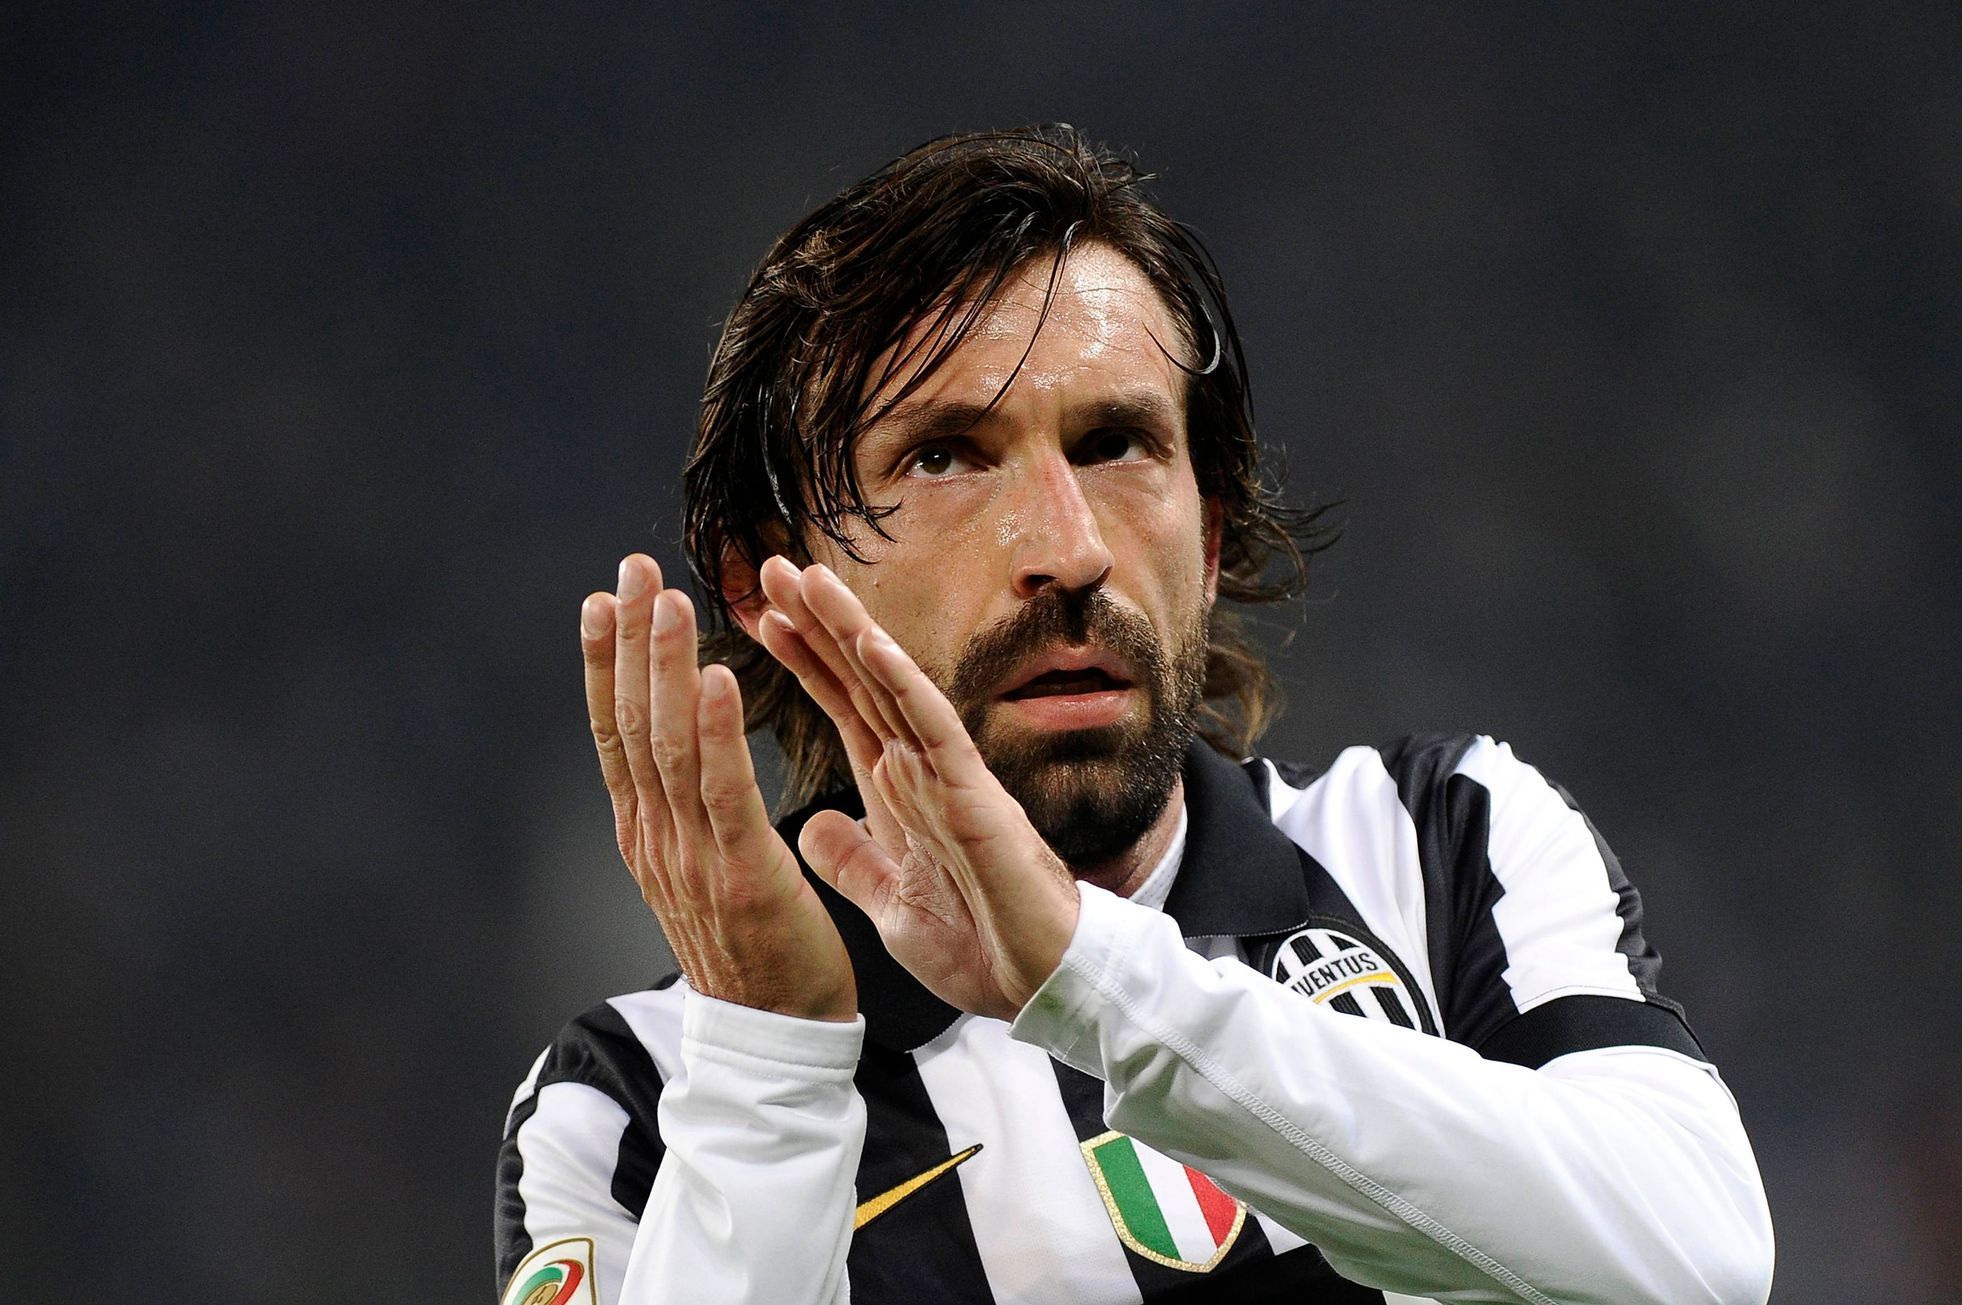 Juventus' Andrea Pirlo reacts during their Italian Serie A soccer match against Atalanta in Turin